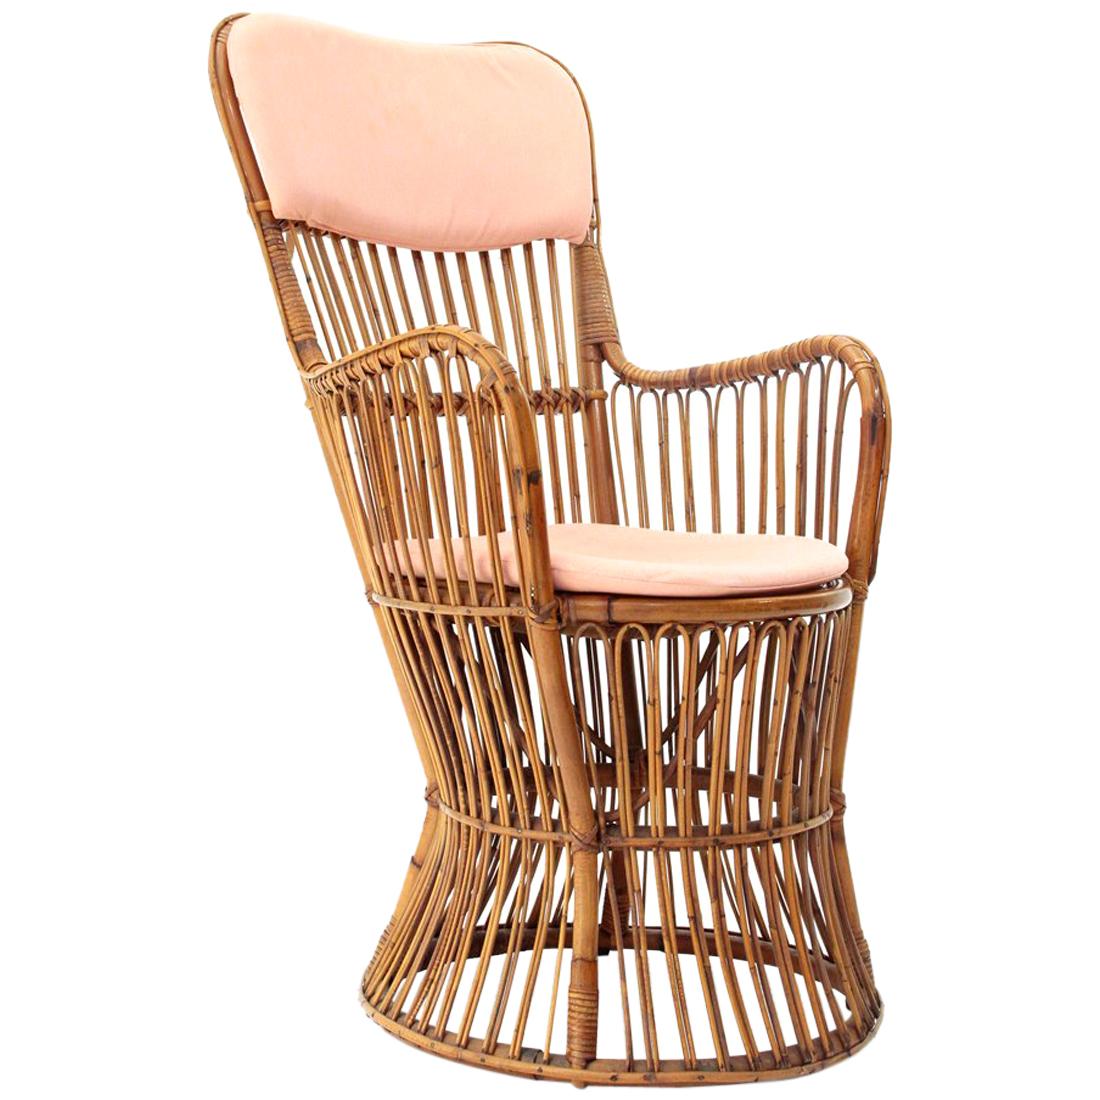 Italian Midcentury Rattan Armchair by Dal Vera, 1950s For Sale